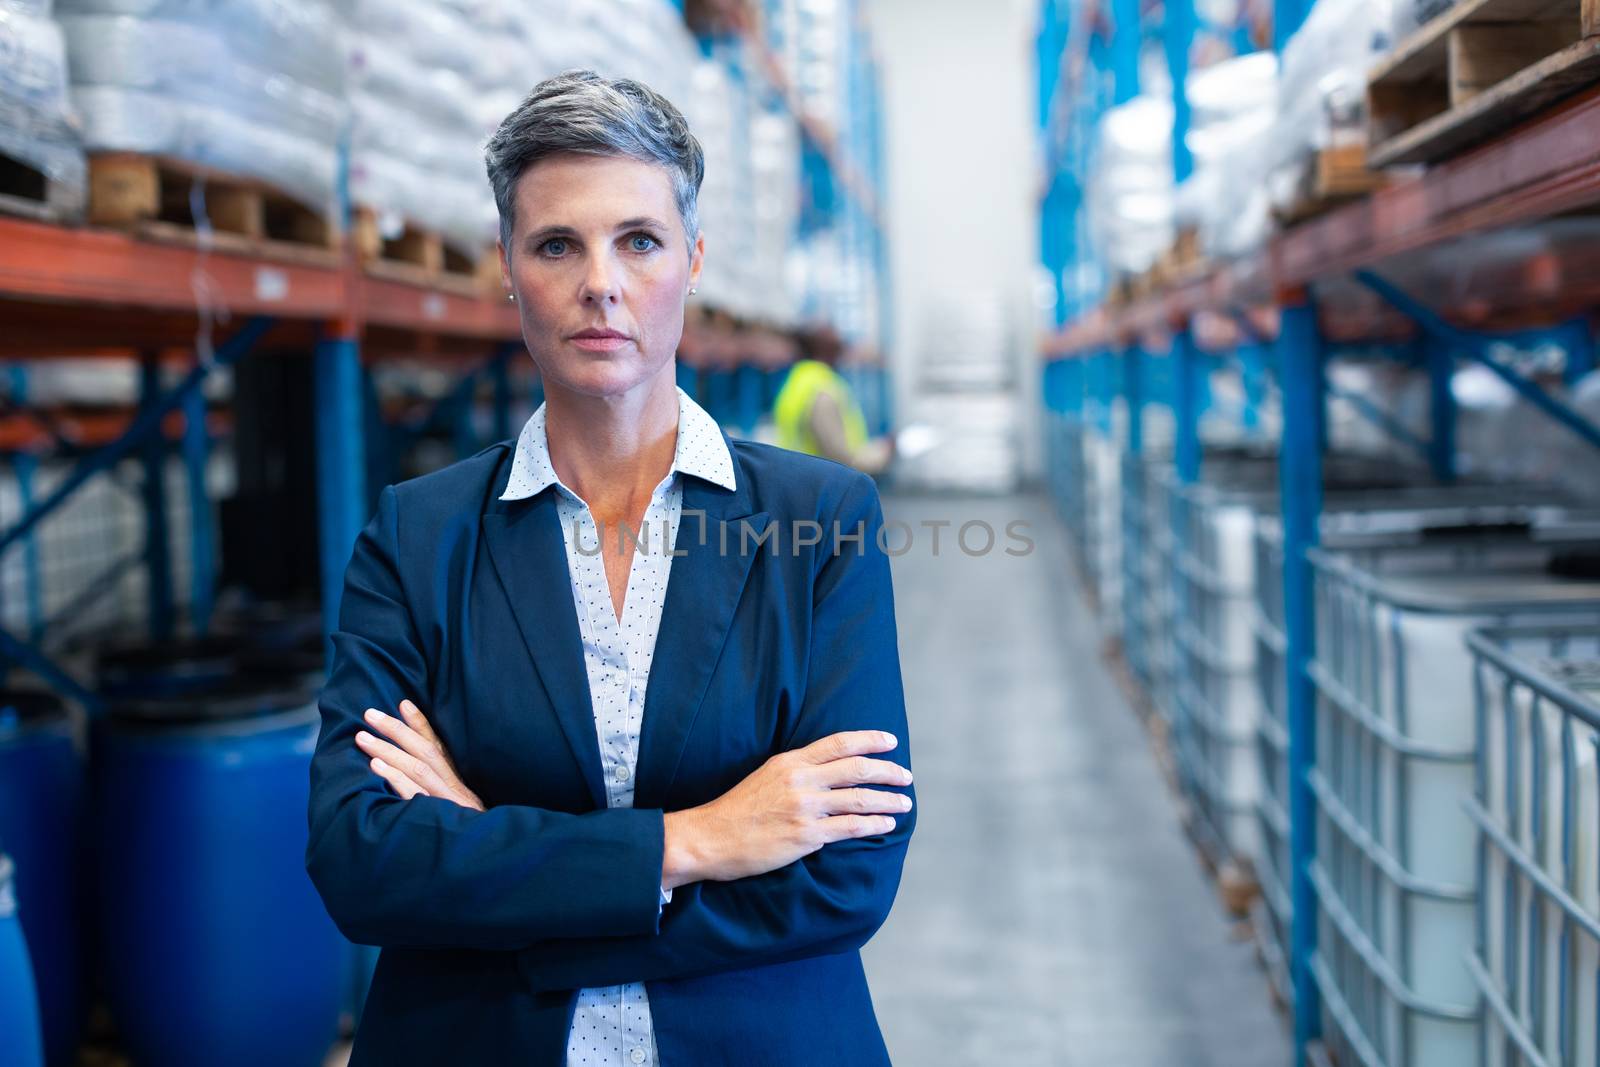 Portrait close-up of beautiful mature Caucasian female manager standing with arm crossed and looking at camera in warehouse. African-american colleague standing in the background. This is a freight transportation and distribution warehouse. Industrial and industrial workers concept